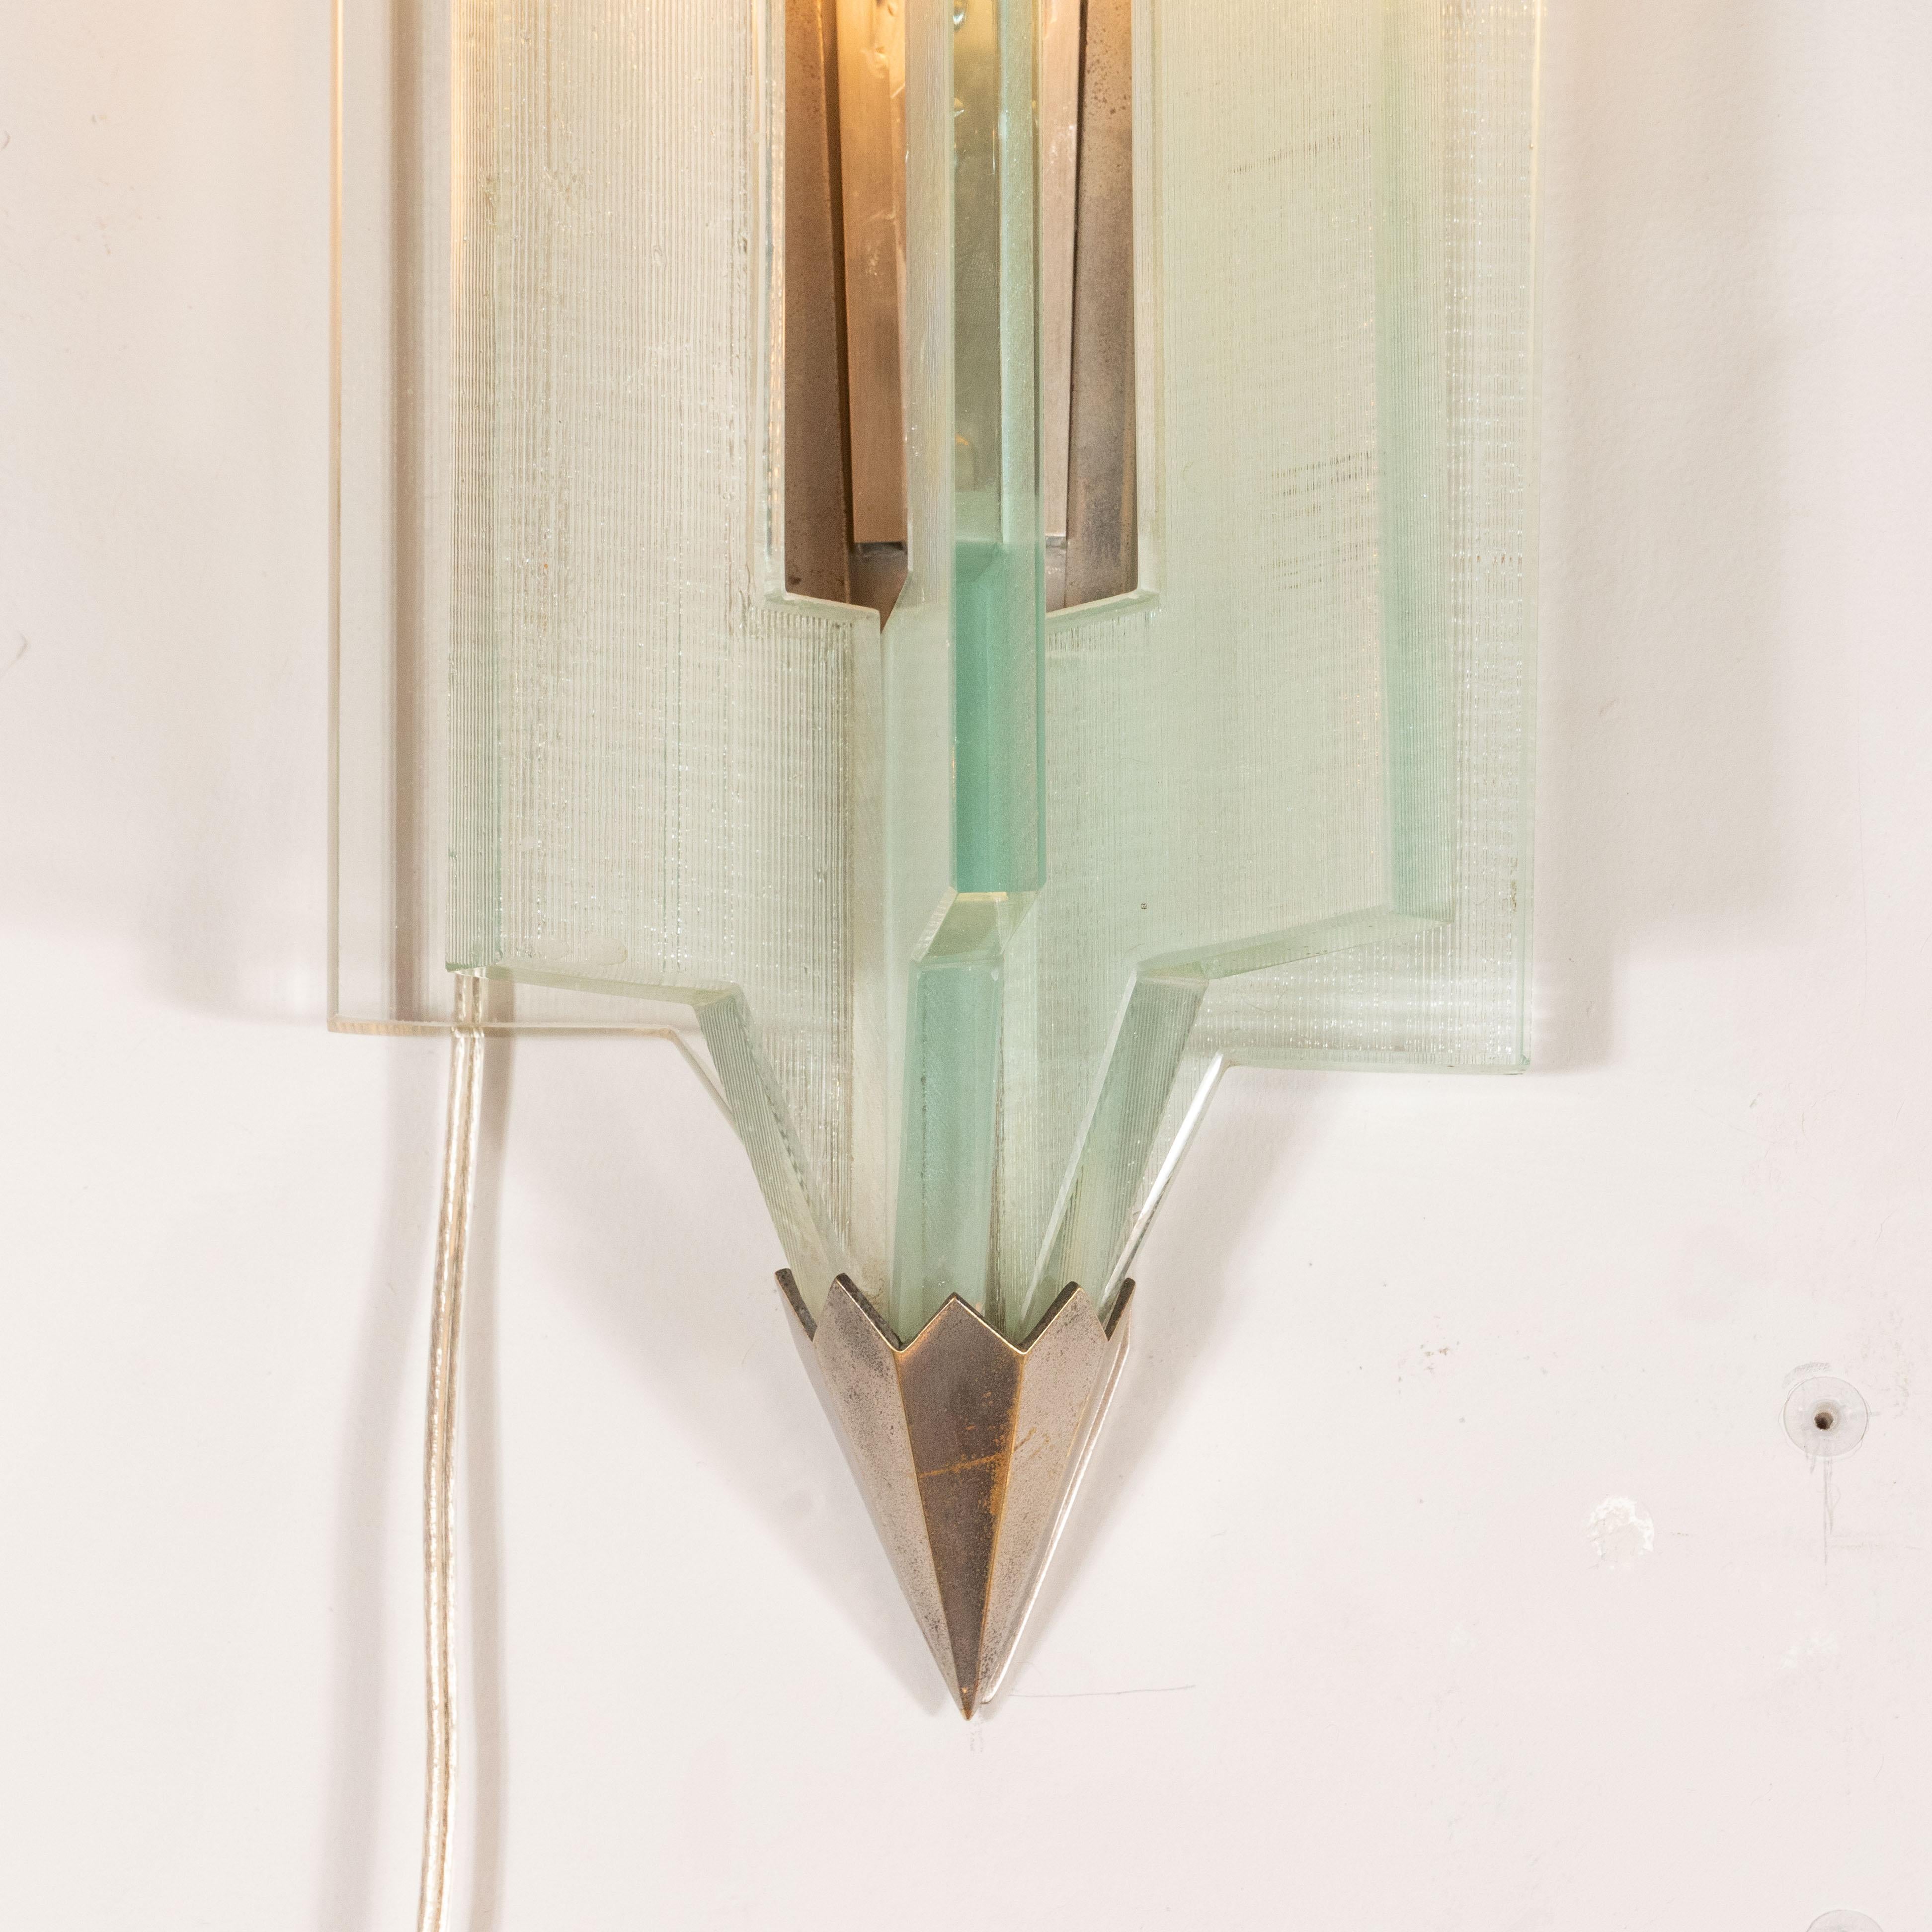 Italian Mid-Century Modern Glass & Antique Nickel Sconces in the Manner of Fontana Arte